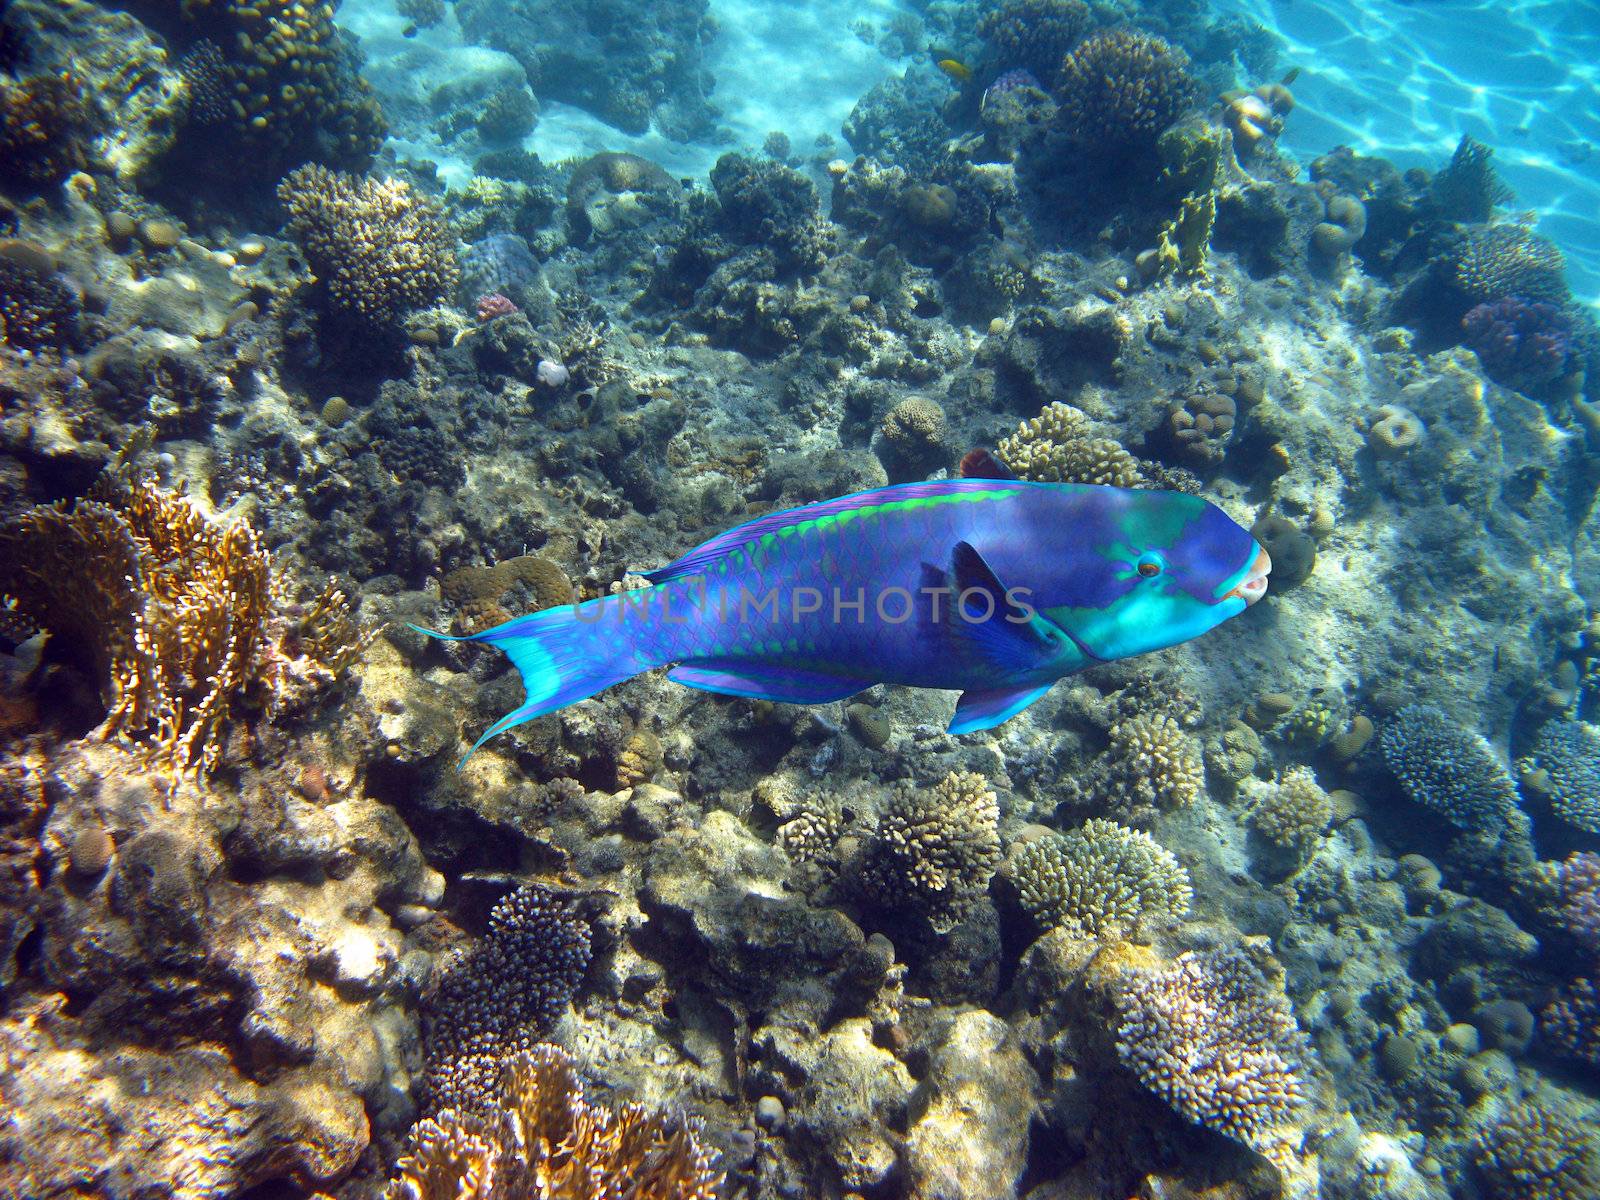 Parrot fish by vintrom